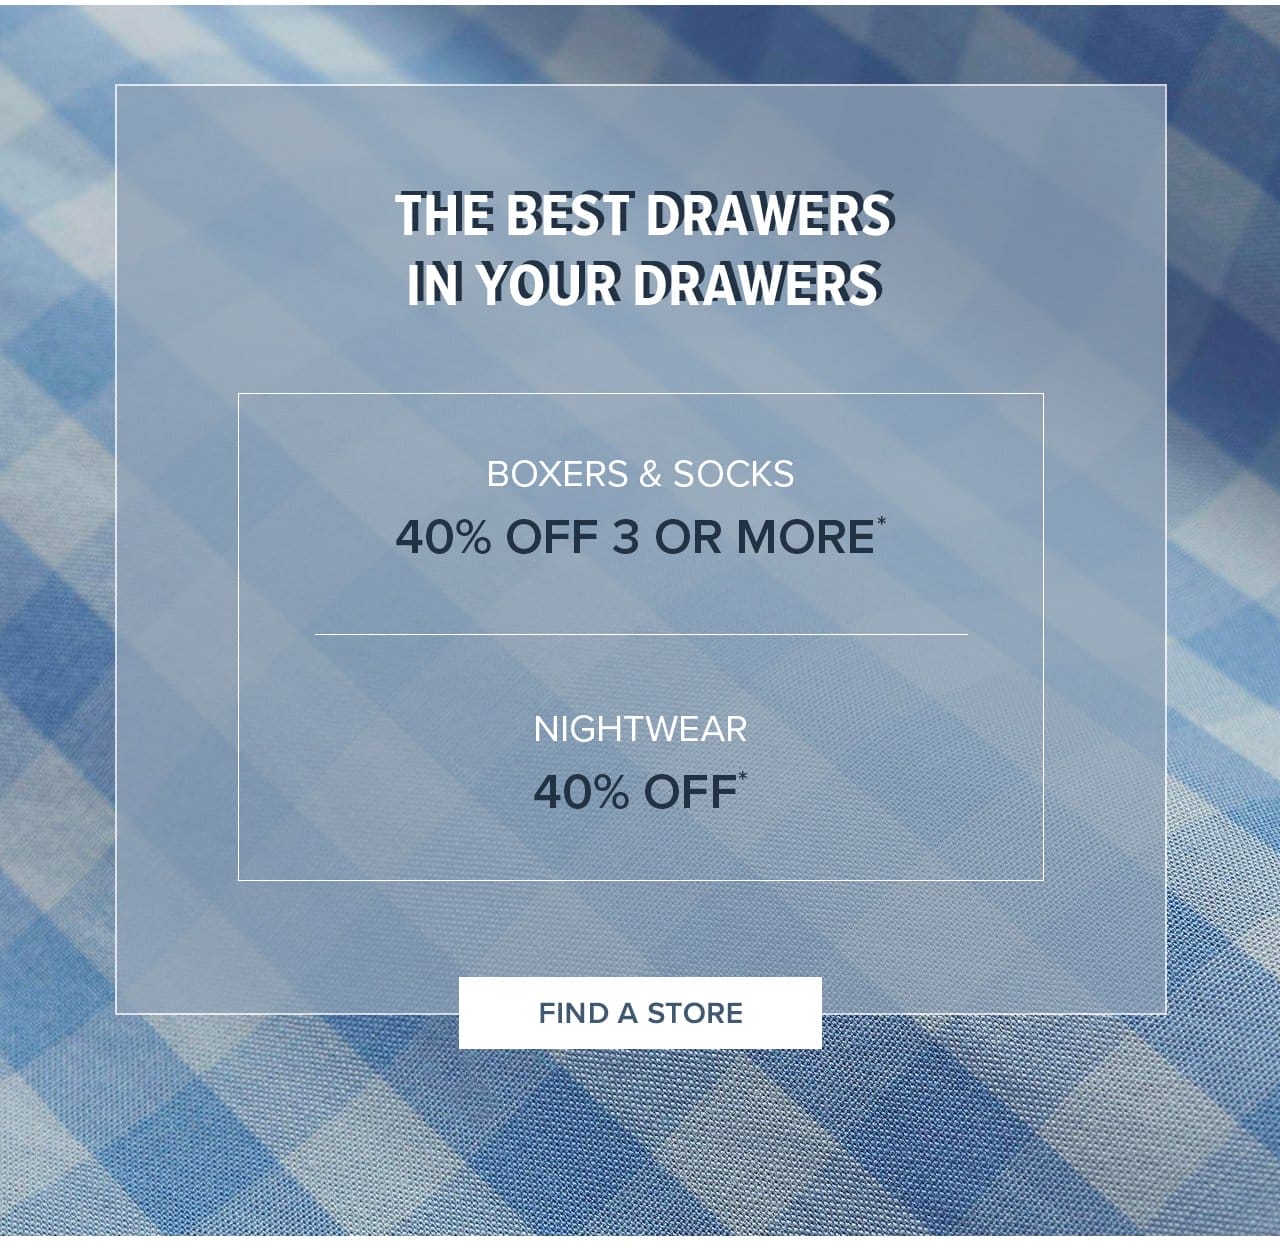 The Best Drawers In Your Drawers Boxers and Socks 40% Off 3 Or More Nightwear 40% Off Find A Store